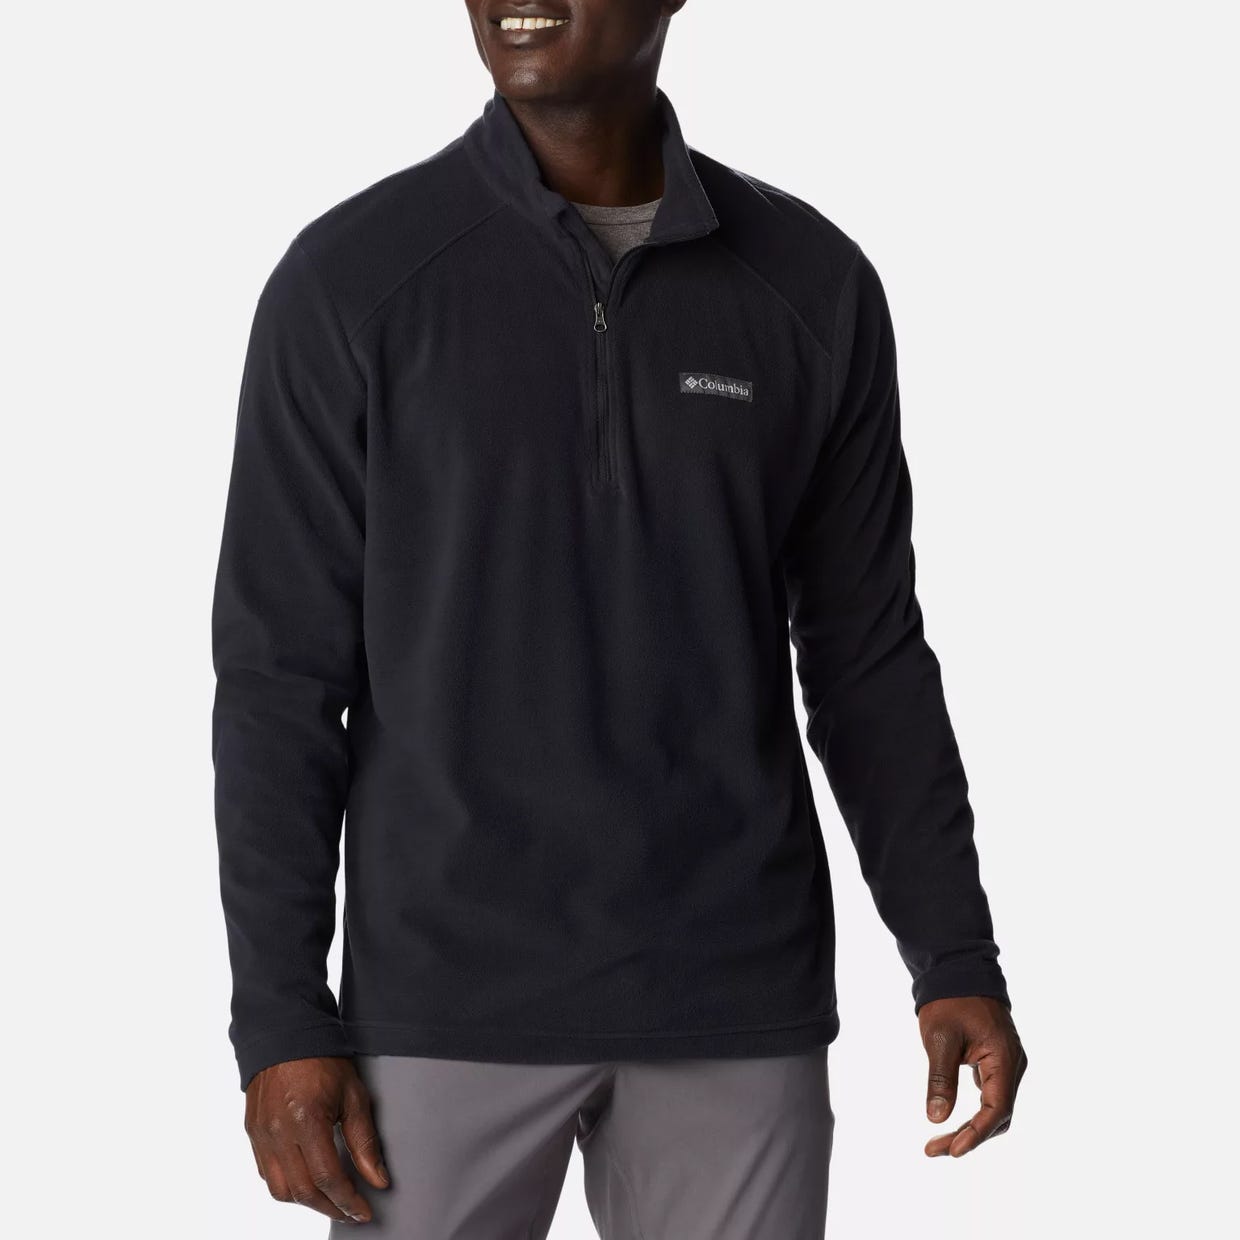 A man wearing a black quarter-zip fleece pullover with a logo on the chest.